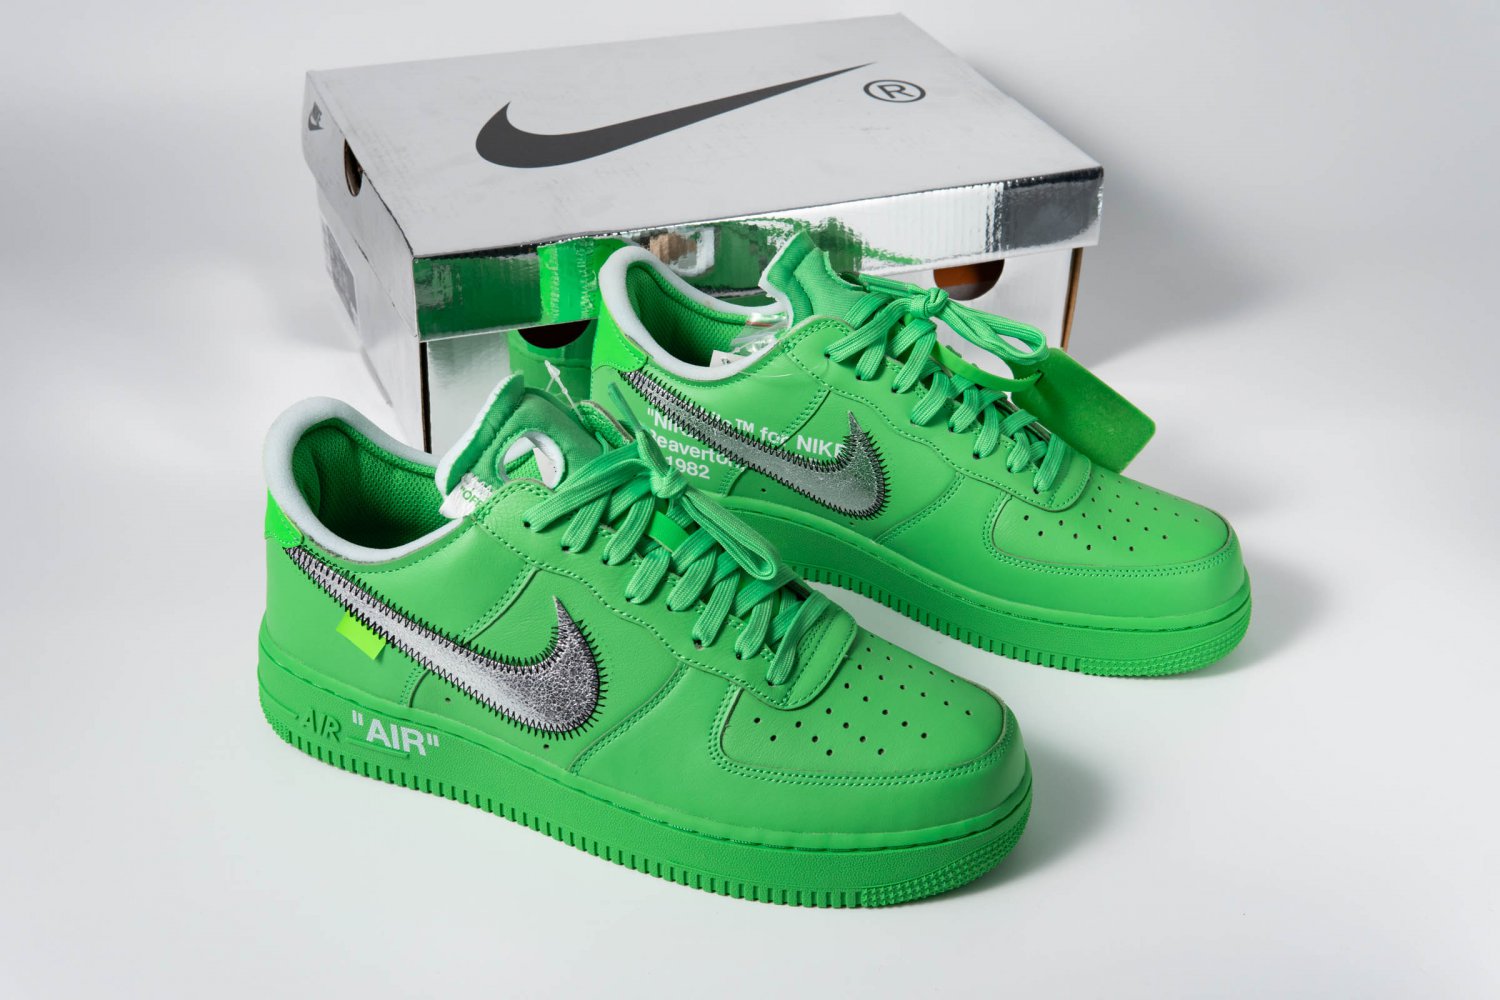 NIKE AIR FORCE 1 LOW - OFF WHITE - LIGHT GREEN SPARK "BROOKLYN" -  SIZE 9US RARE